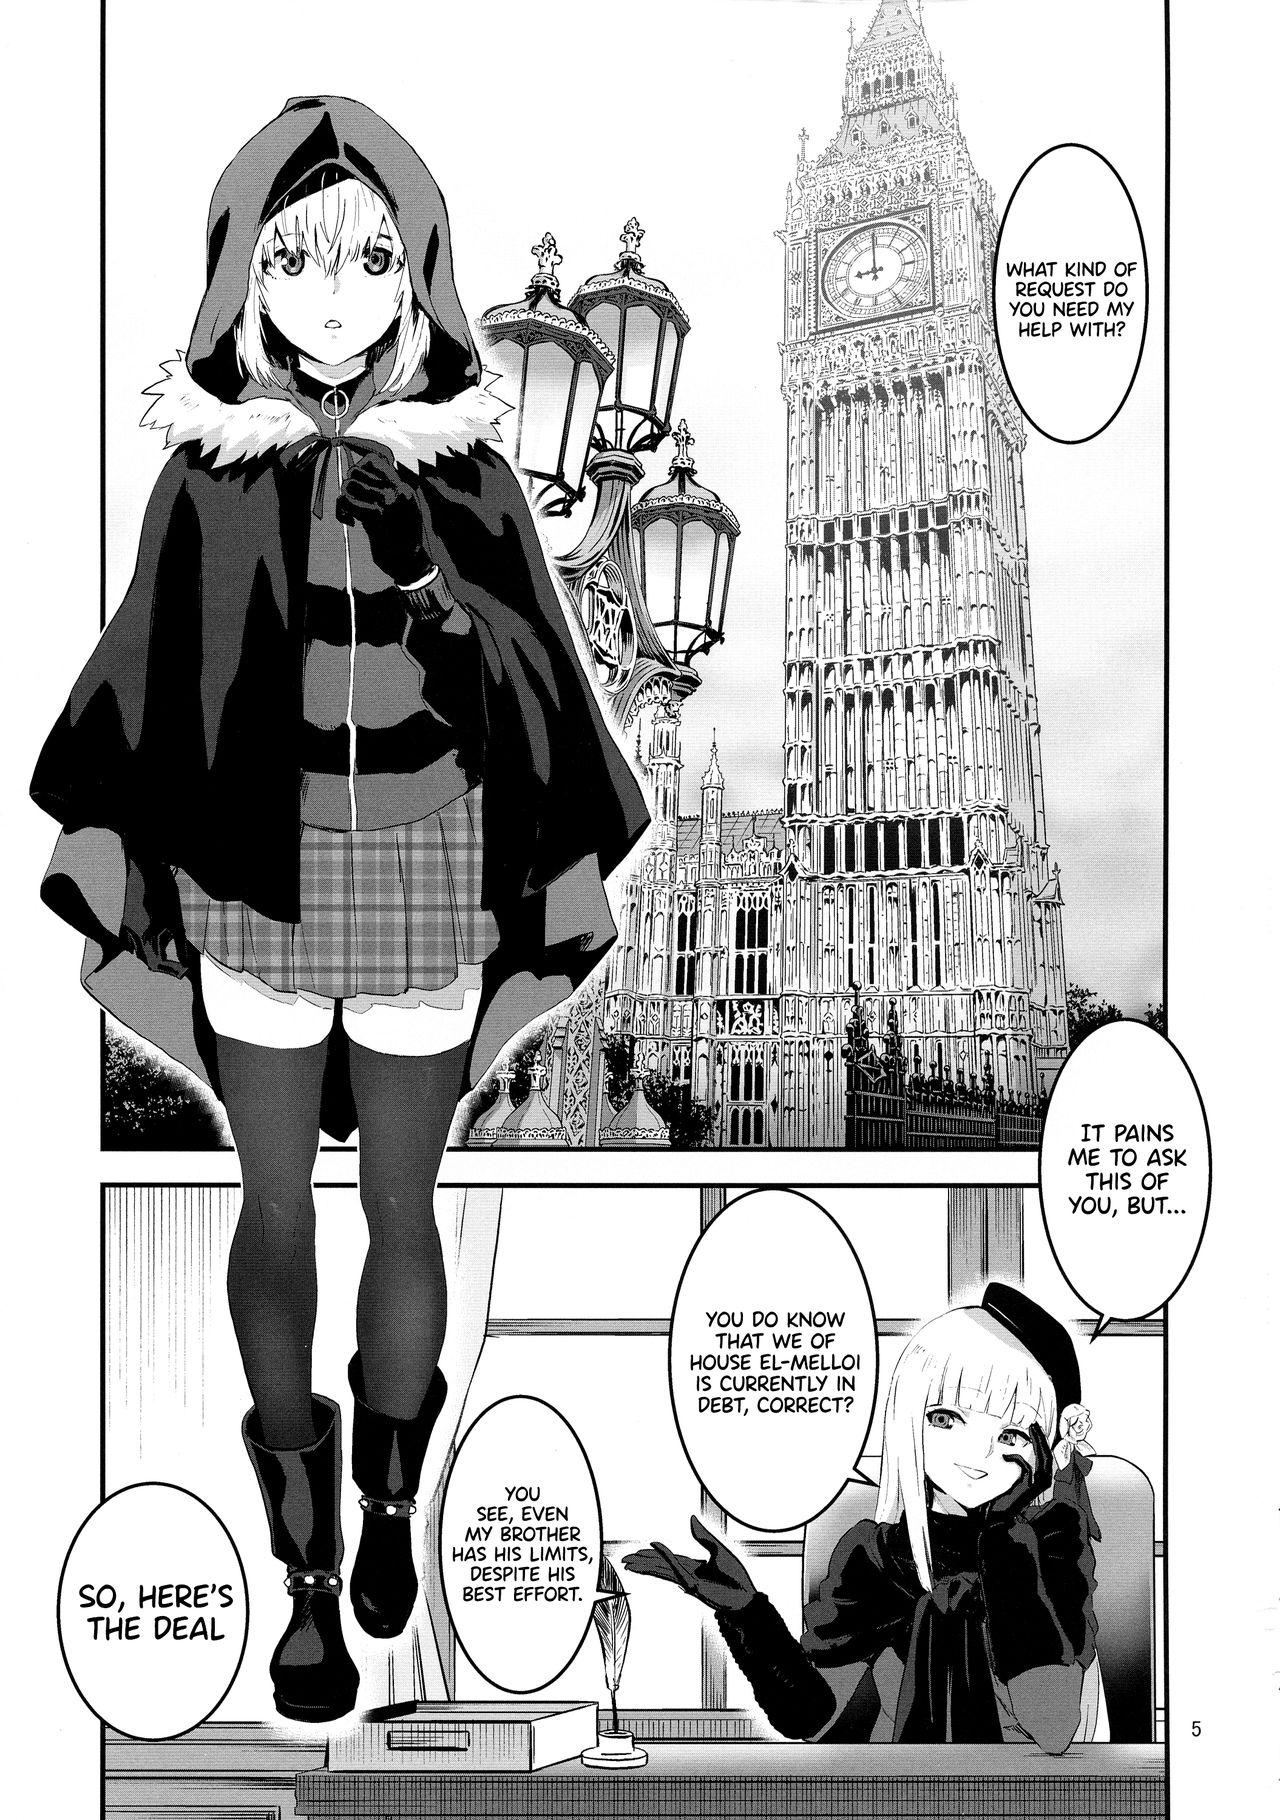 Bath Taking Advantage of Gray-chan Weakness, We Graduated from our Virginity. - Lord el-melloi ii sei no jikenbo Leite - Page 5